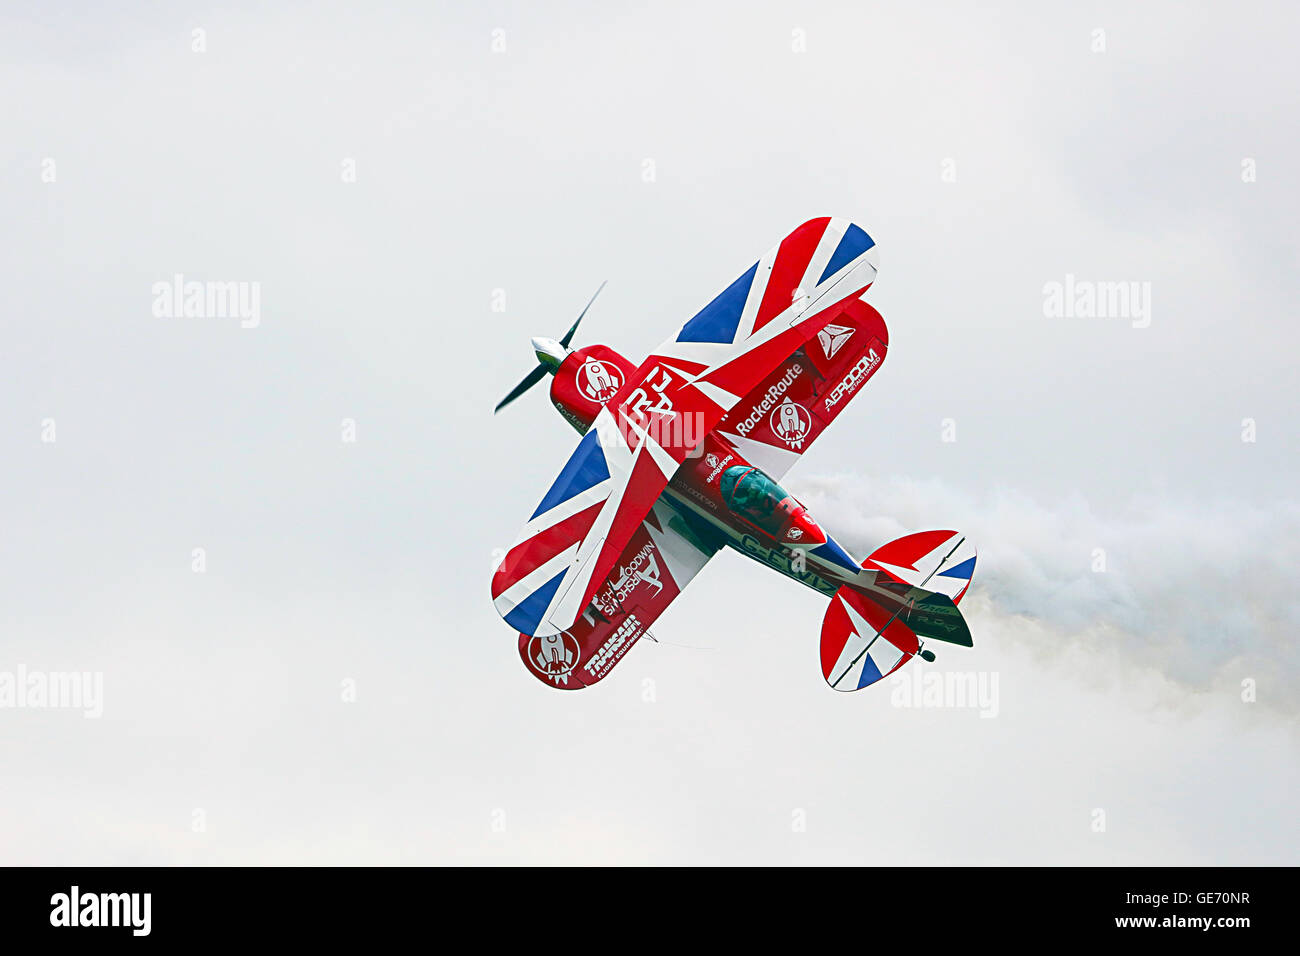 Pitts S 25 Special) at Scotland's Airshow Stock Photo